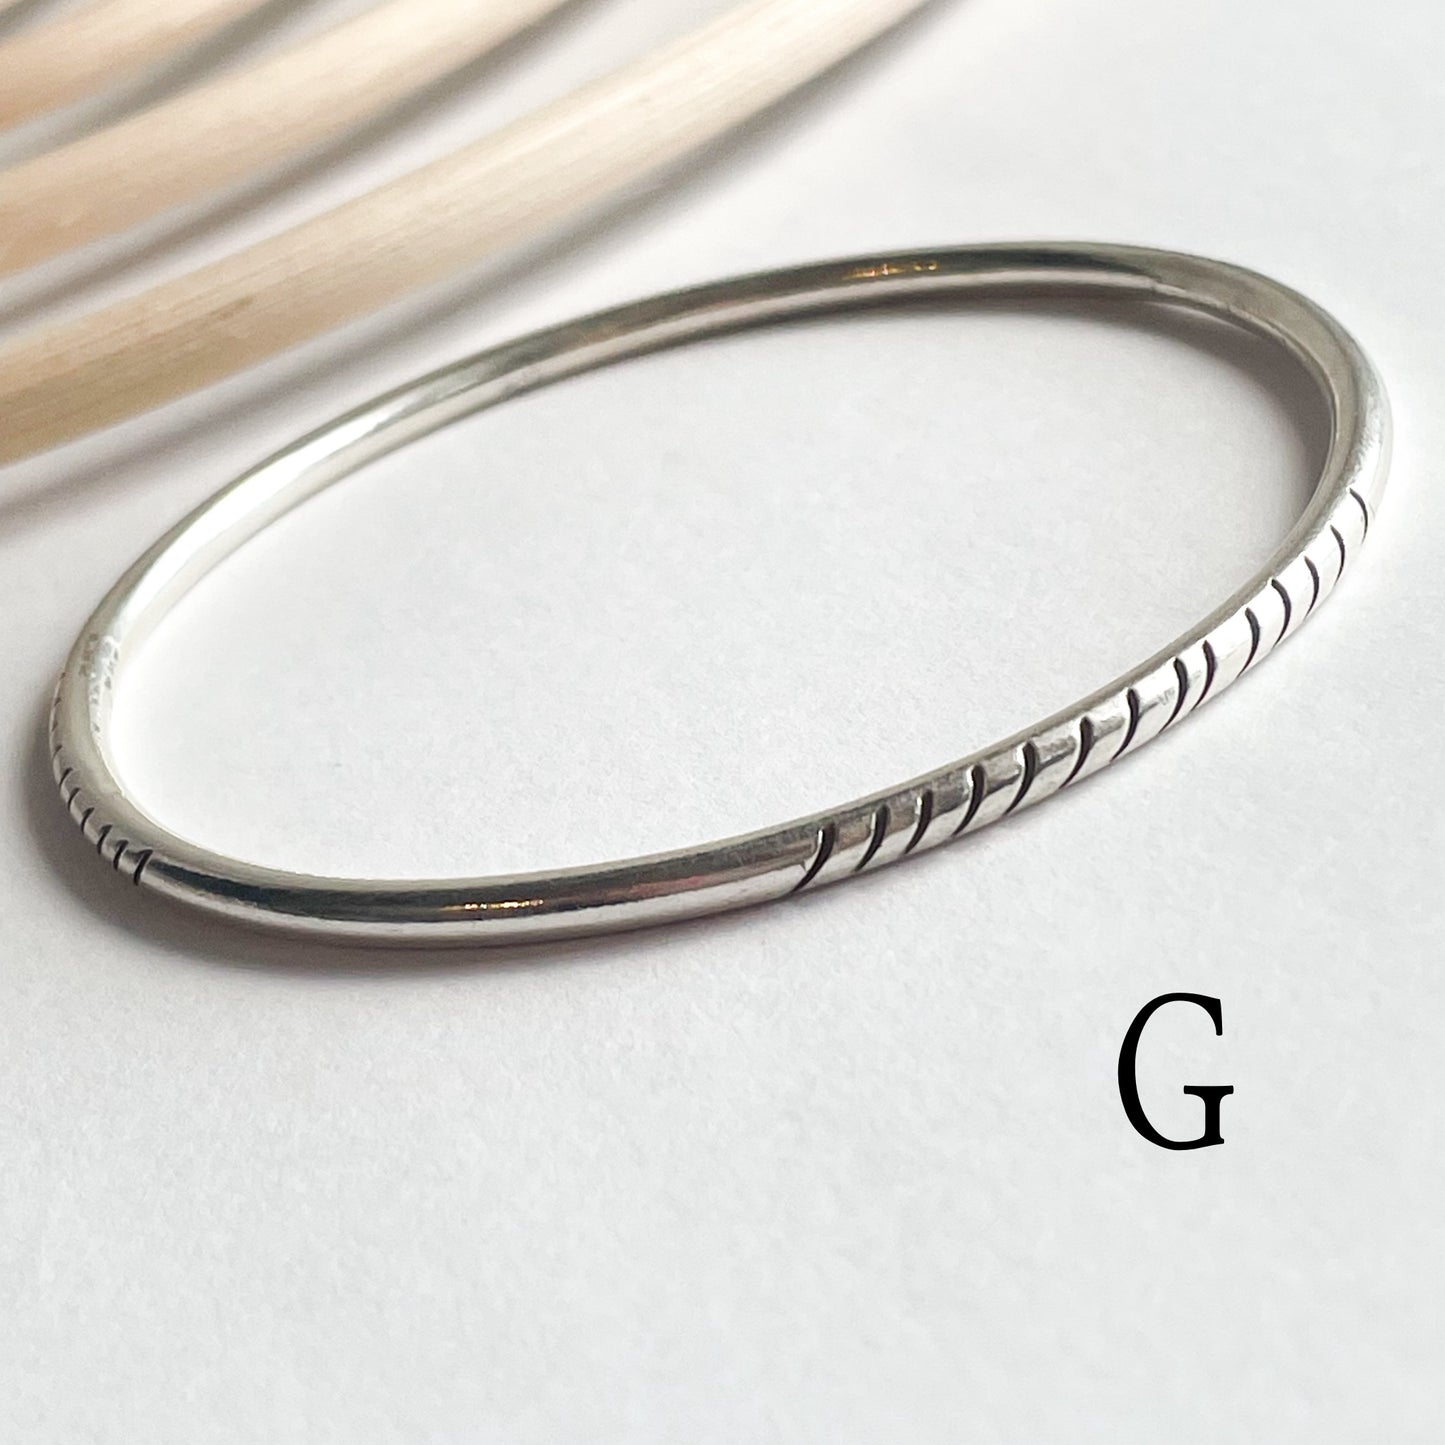 Tribal Cut Bangle - Solid Sterling Silver